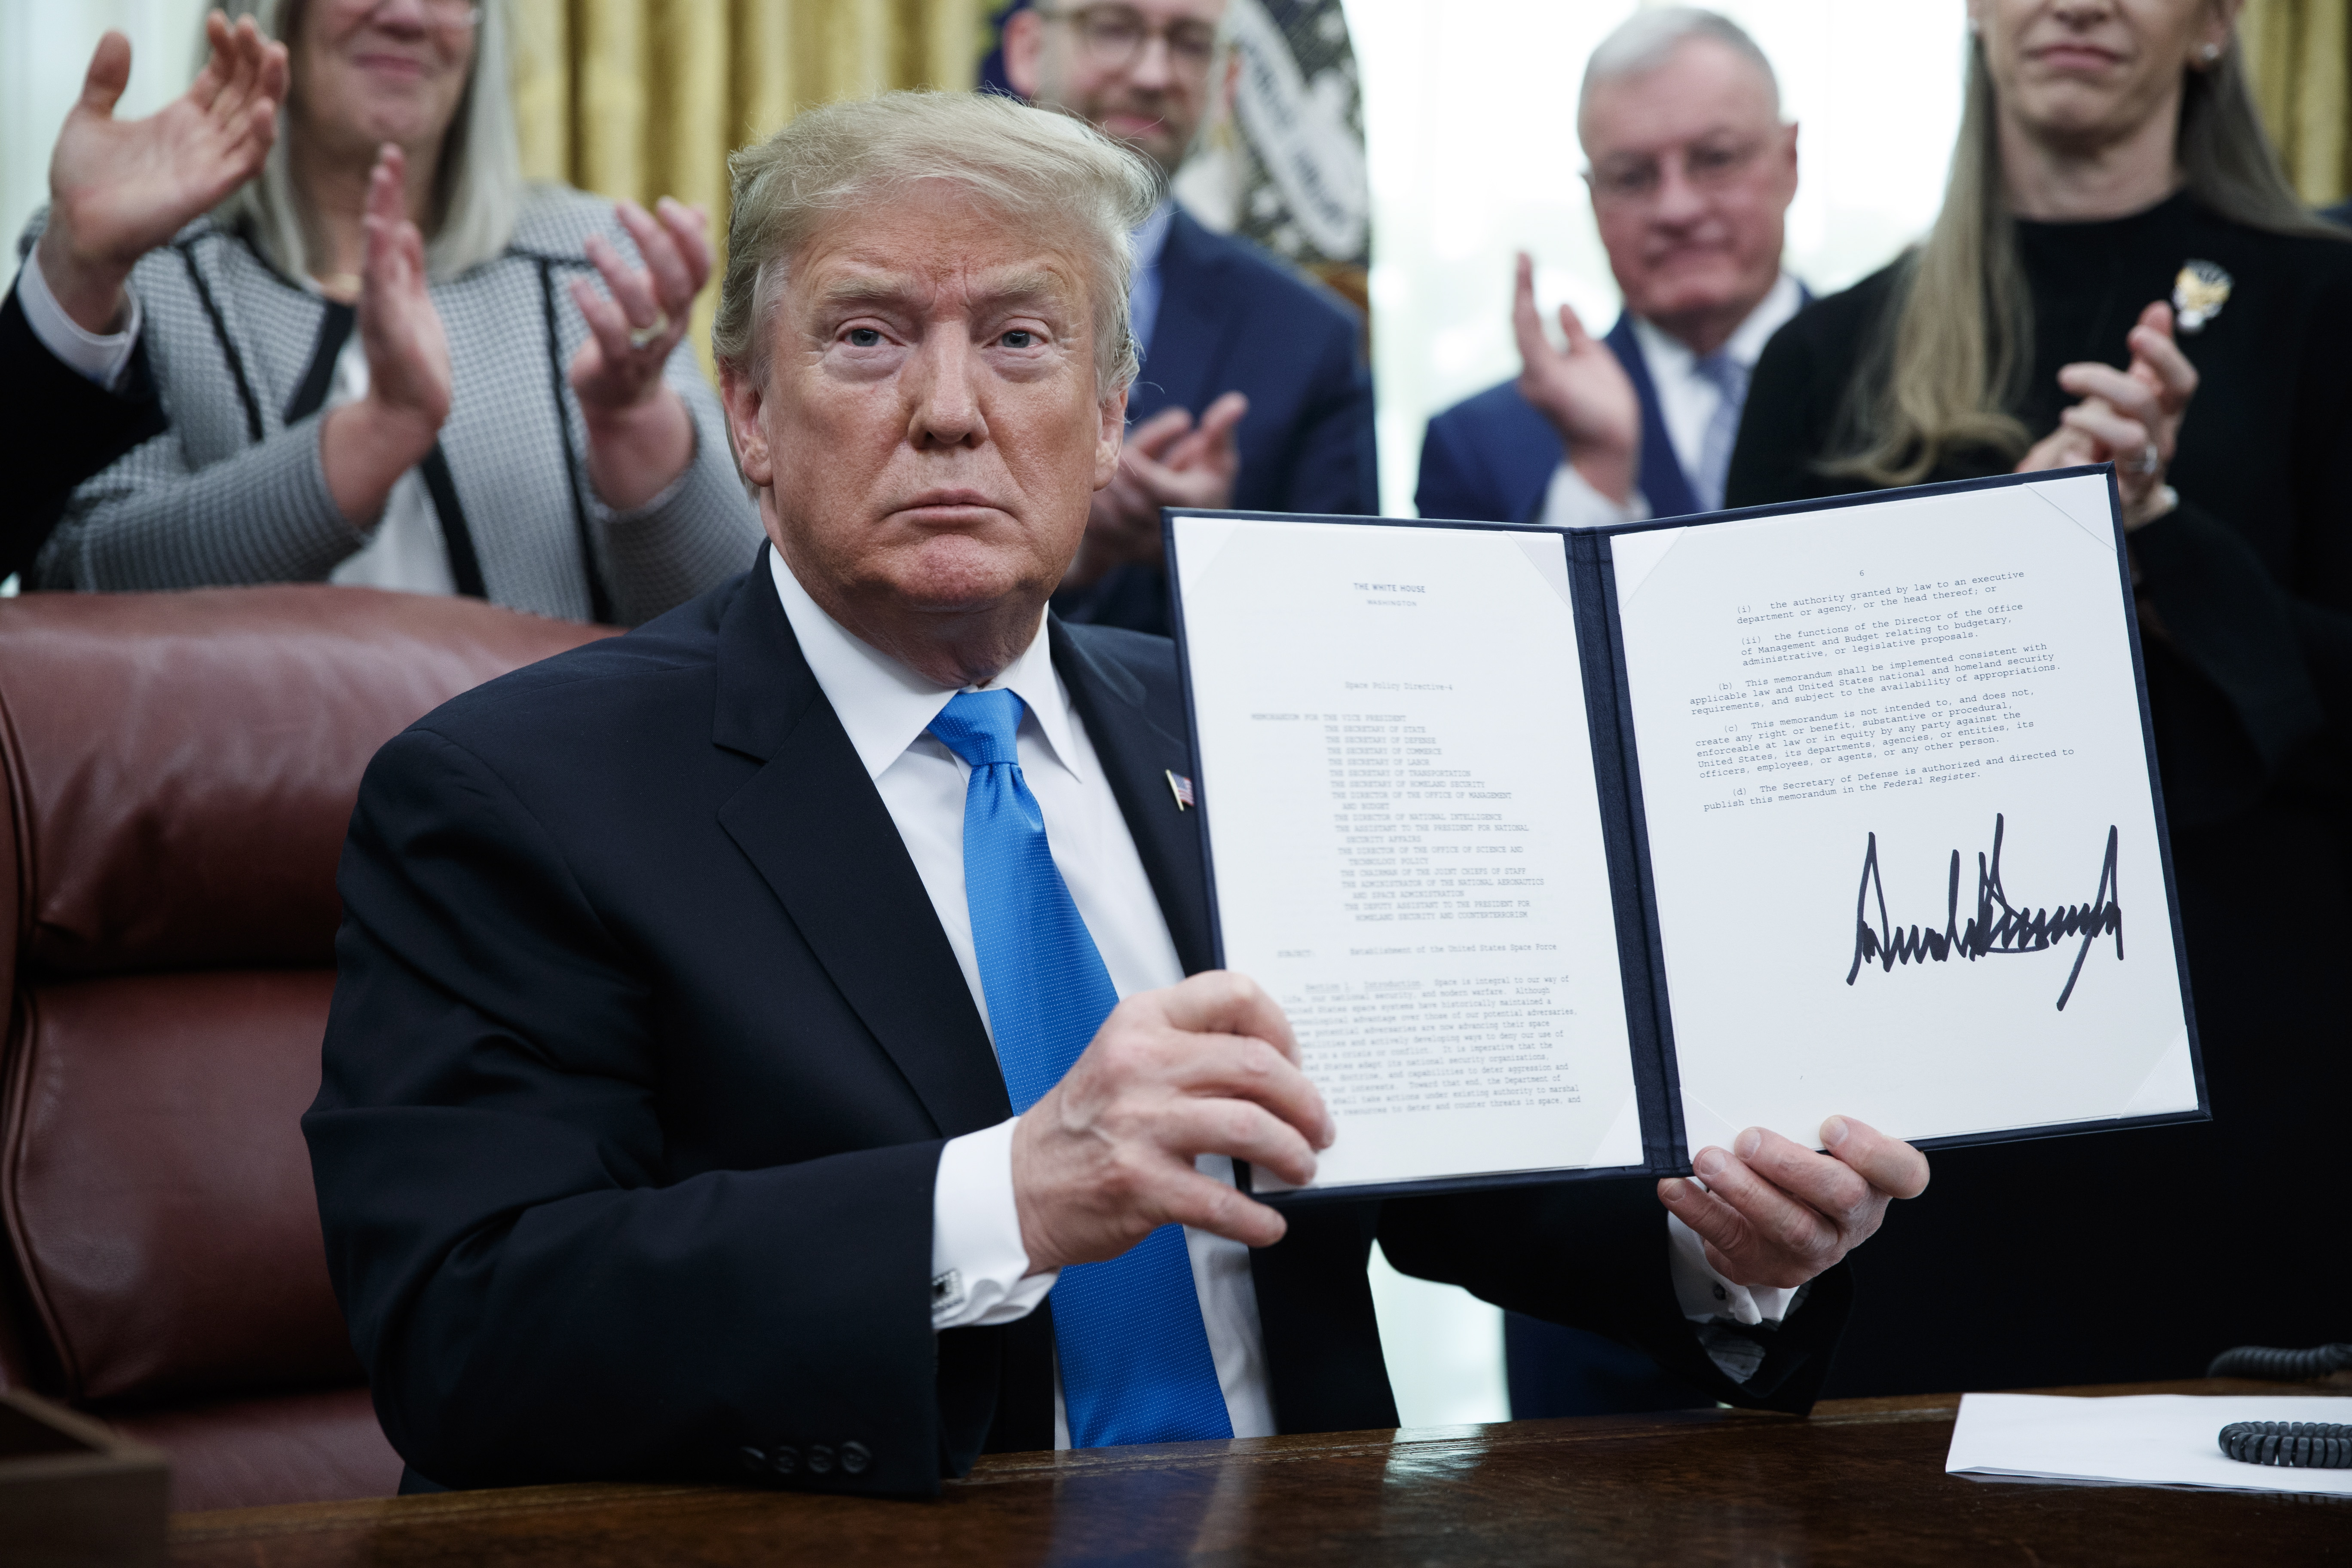 epa07381615 US President Donald J. Trump participates in a signing ceremony for Space Policy Directive 4 in the Oval Office of the White House in Washington, DC, USA, 19 February 2019. The policy directive establishes the Space Force as the 6th branch of US armed forces operating within the department of the Air Force.  EPA/SHAWN THEW